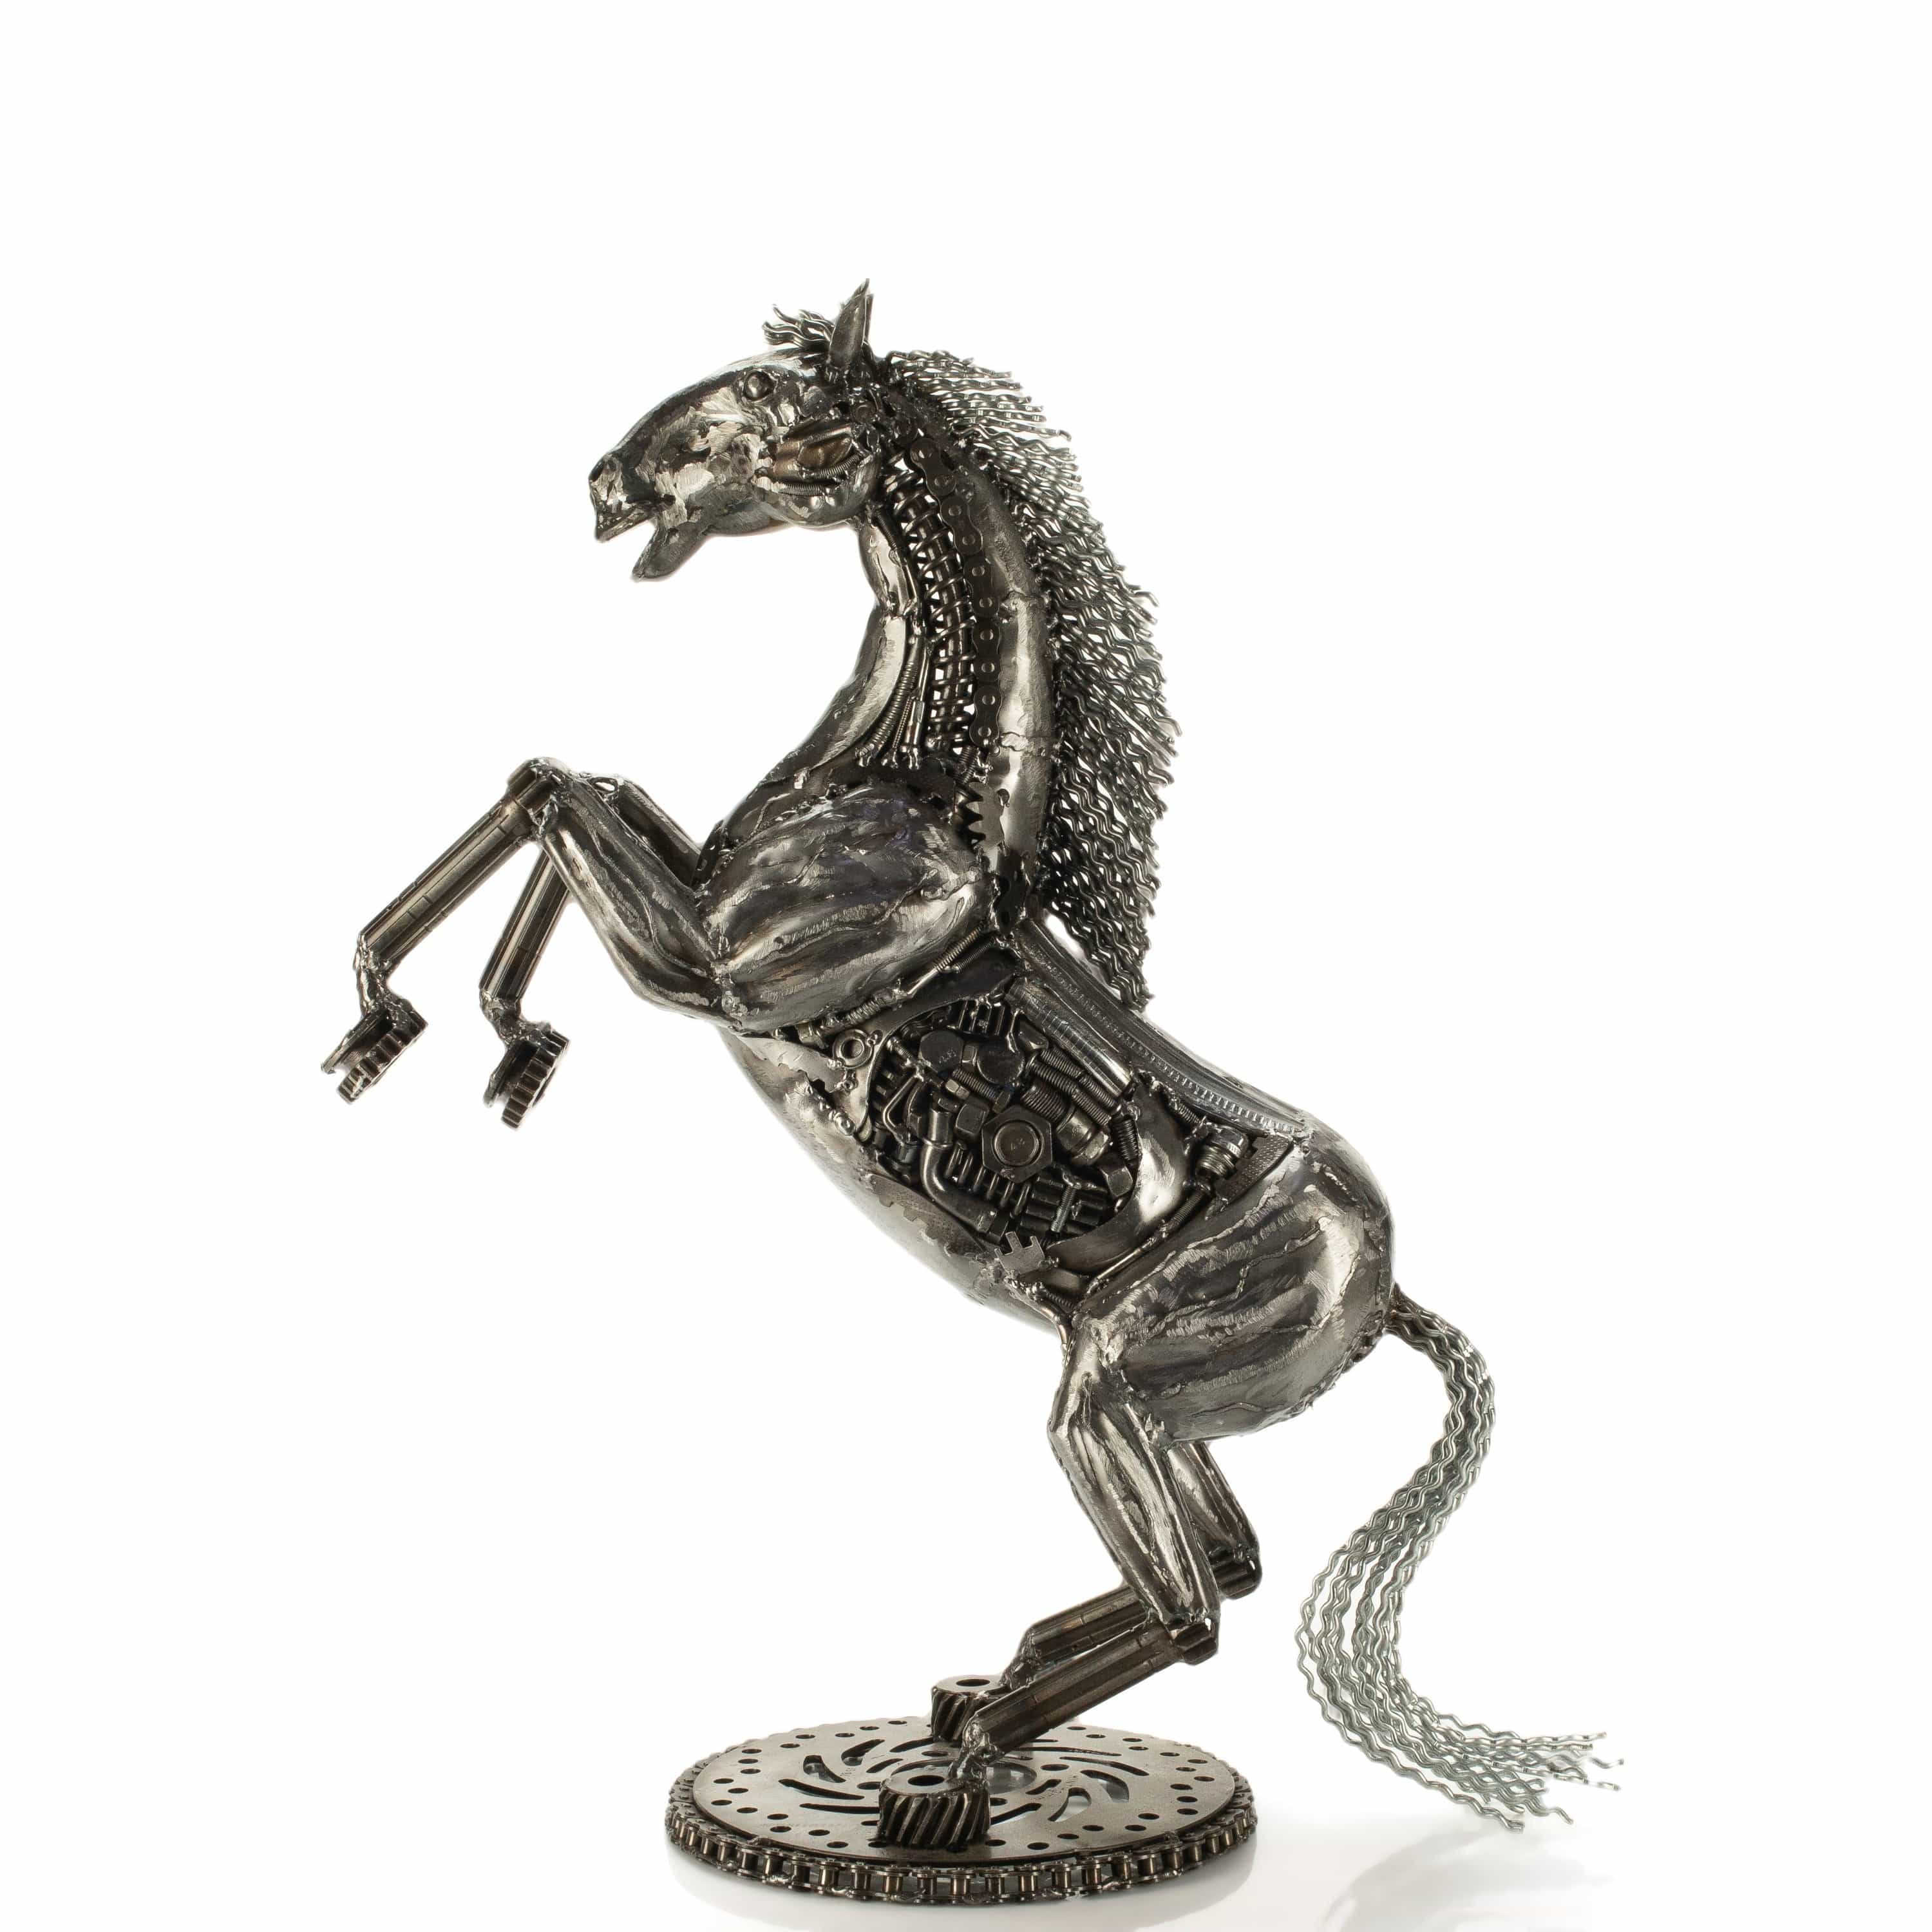 KALIFANO Recycled Metal Art 29" Jumping Horse Inspired Recycled Metal Art Sculpture RMS-JHS74x53-PK